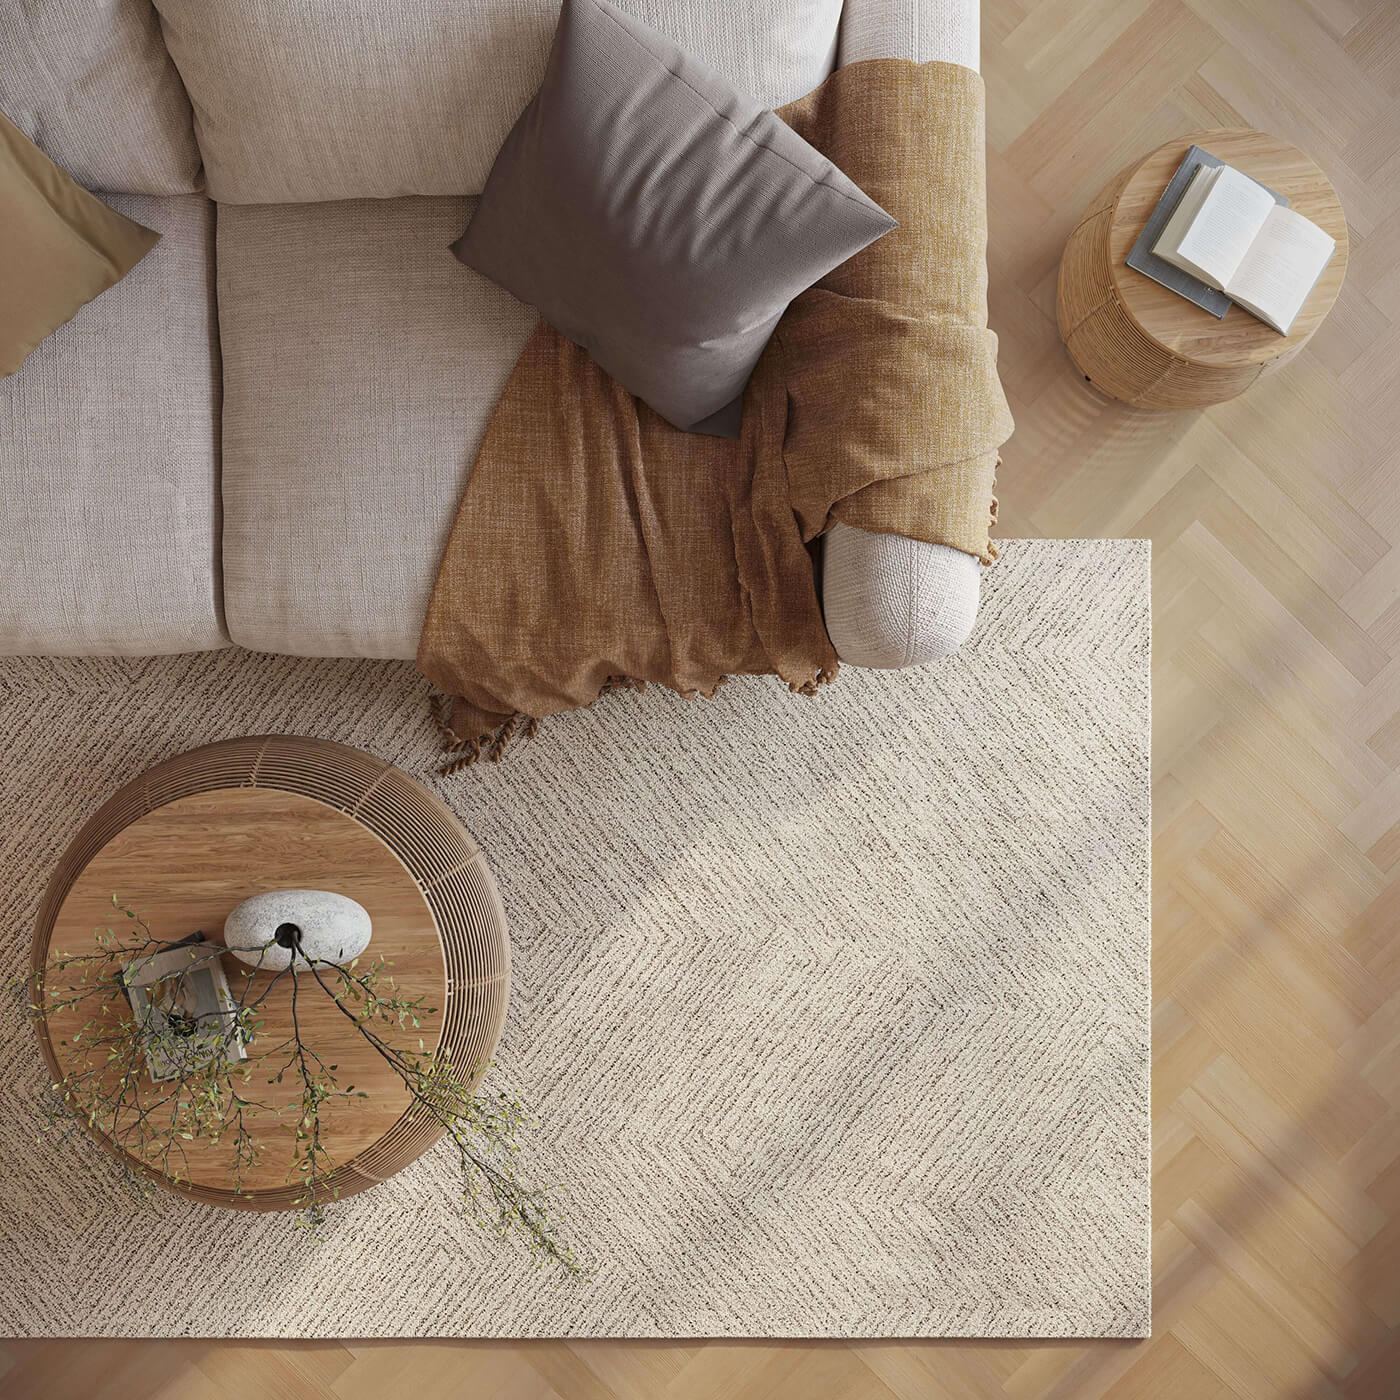 Lifestyle 3D Visualization of a Beige Rug